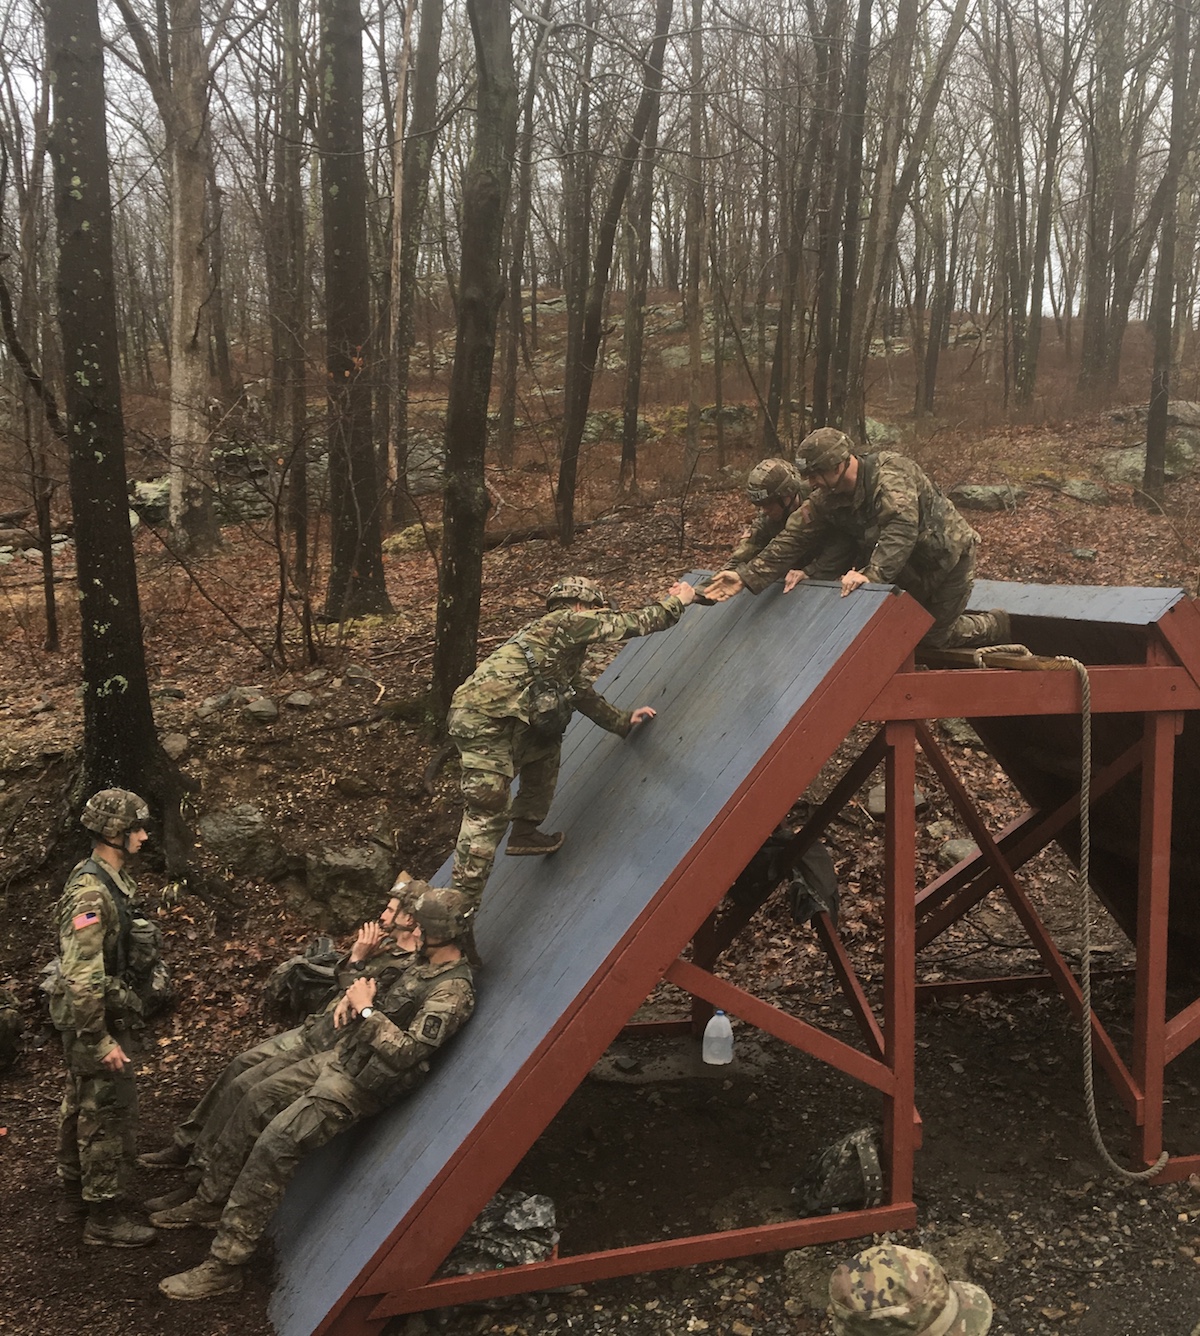 The Austin Peay Ranger Challenge team attacks an obstacle during the Sandhurst competition April 13-14 at West Point, New York.